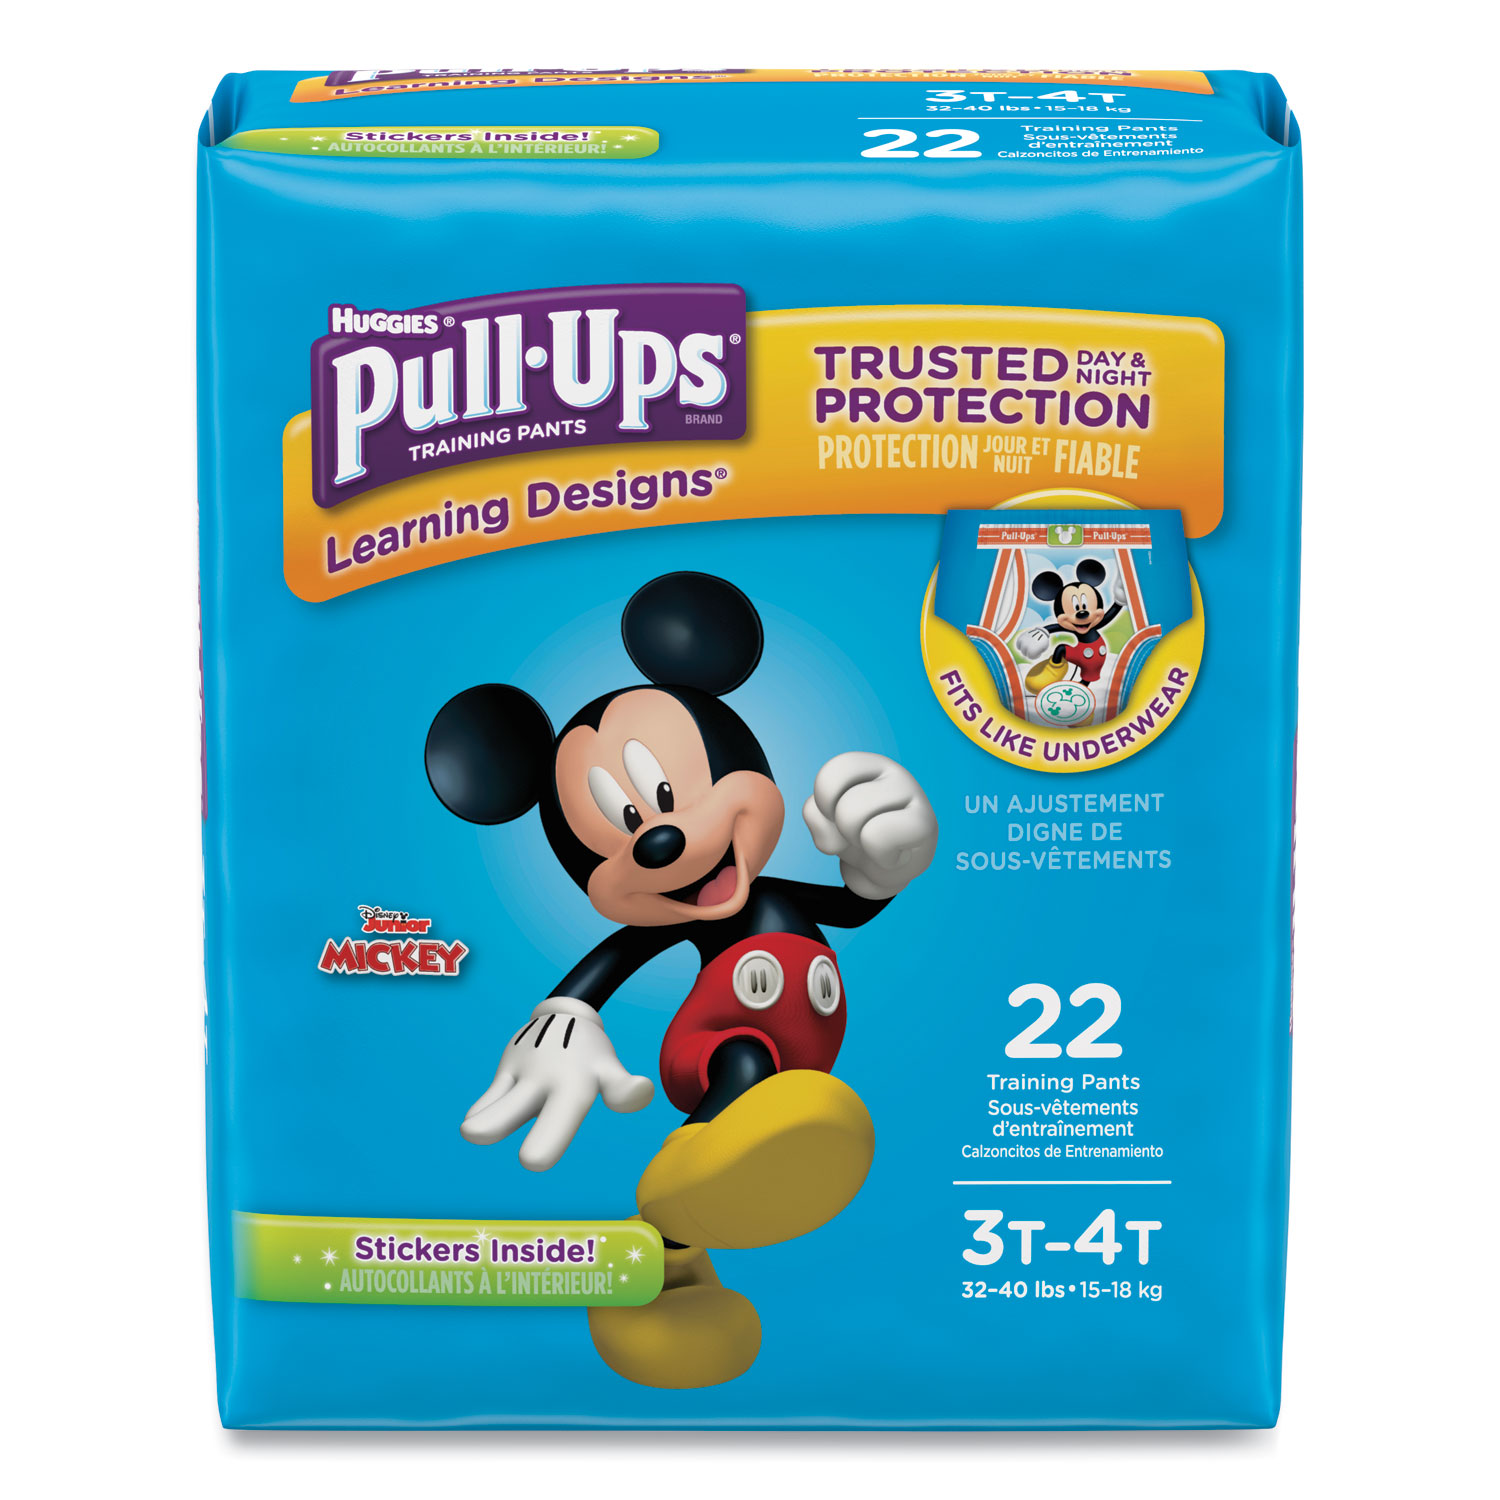  Huggies 45141 Pull-Ups Learning Designs Potty Training Pants for Boys, Size 3T-4T, 22/Pack (KCC45141) 